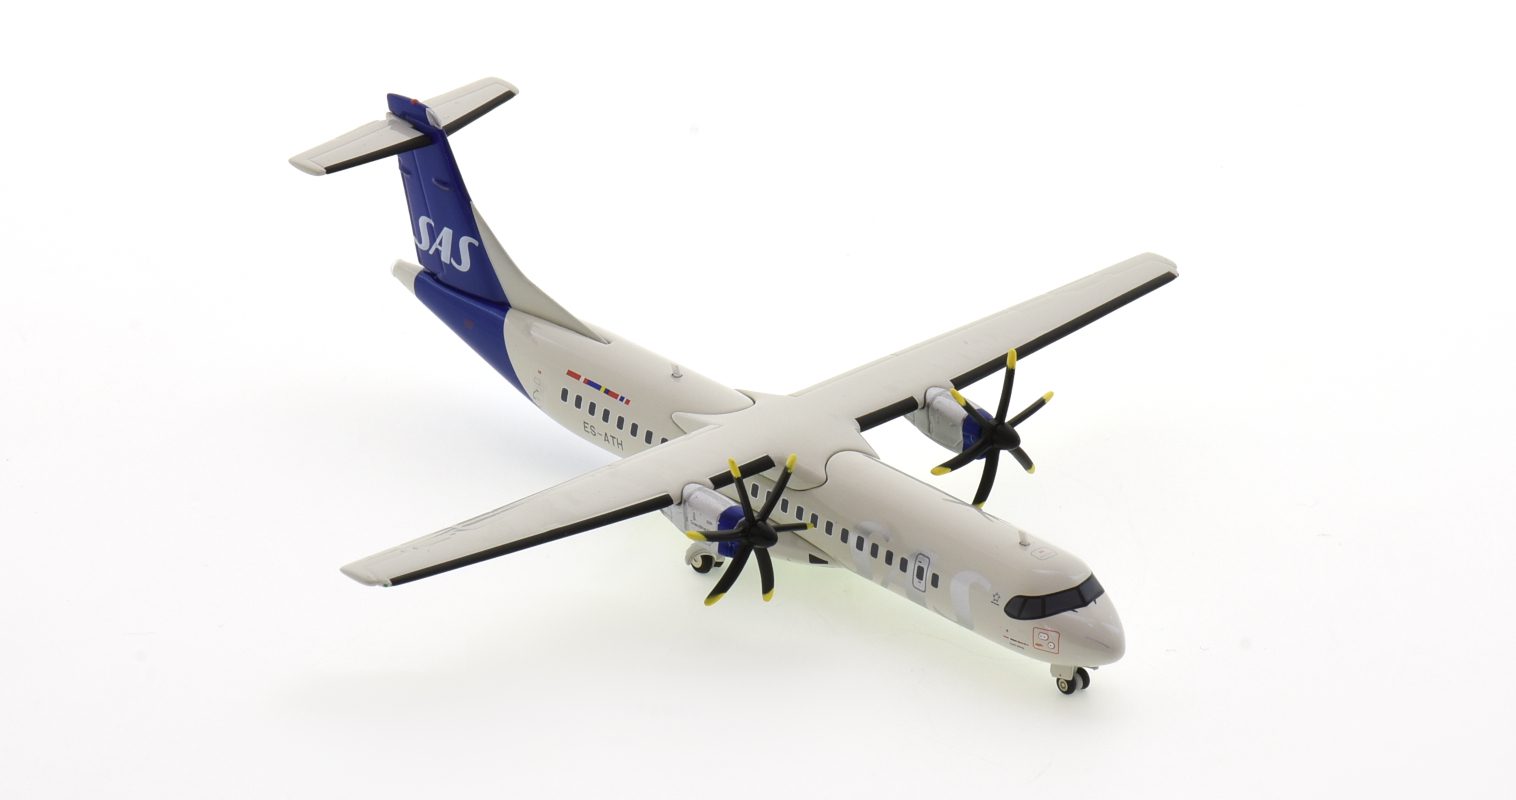 Front starboard side view of Herpa Wings HE571067 - 1/200 scale diecast model ATR 72-600, registration ES-ATH in Scandinavian Airline's livery.